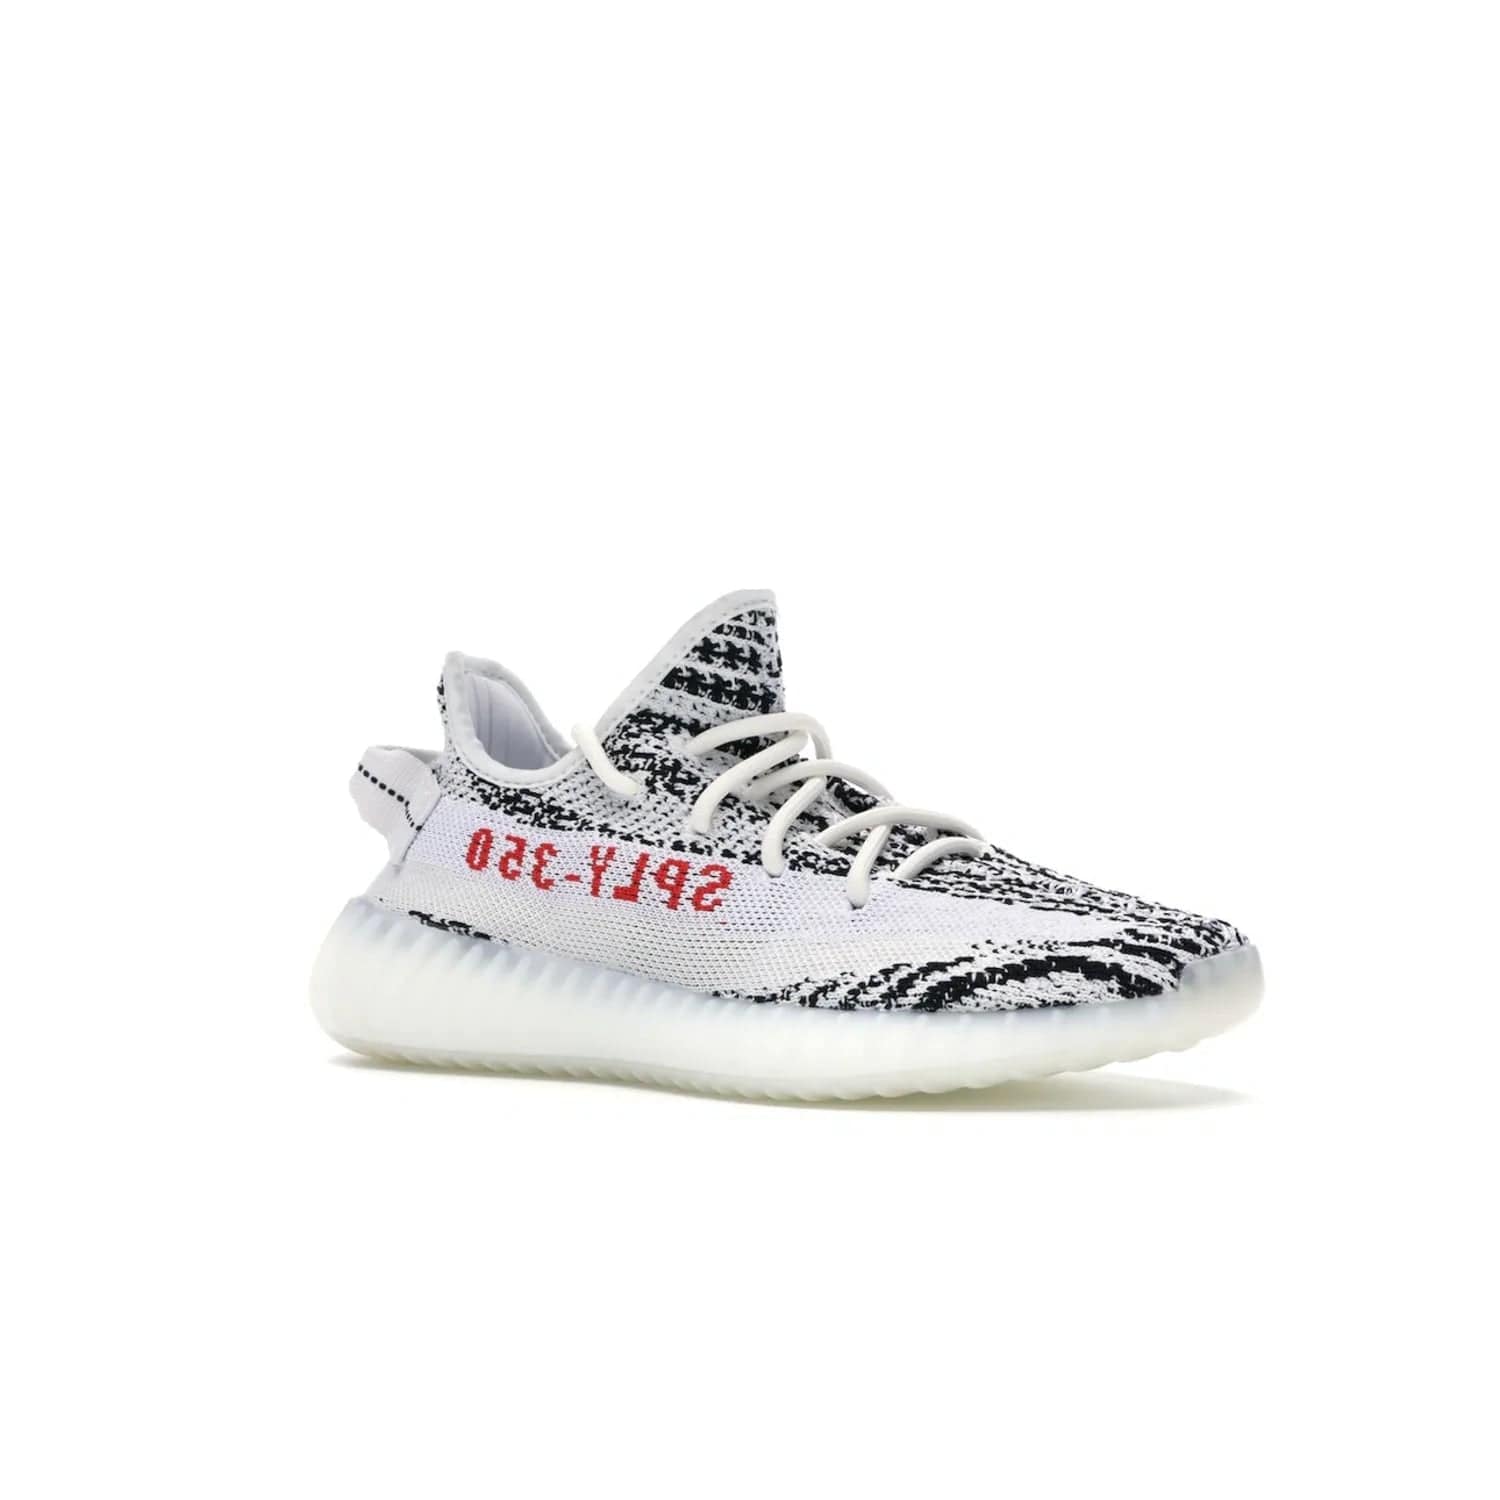 adidas Yeezy Boost 350 V2 Zebra - Image 4 - Only at www.BallersClubKickz.com - #
Score the iconic adidas Yeezy Boost 350 V2 Zebra for a fashionable addition to your street-style. Featuring a Primeknit upper and Boost sole, you'll look great and feel comfortable with every step.